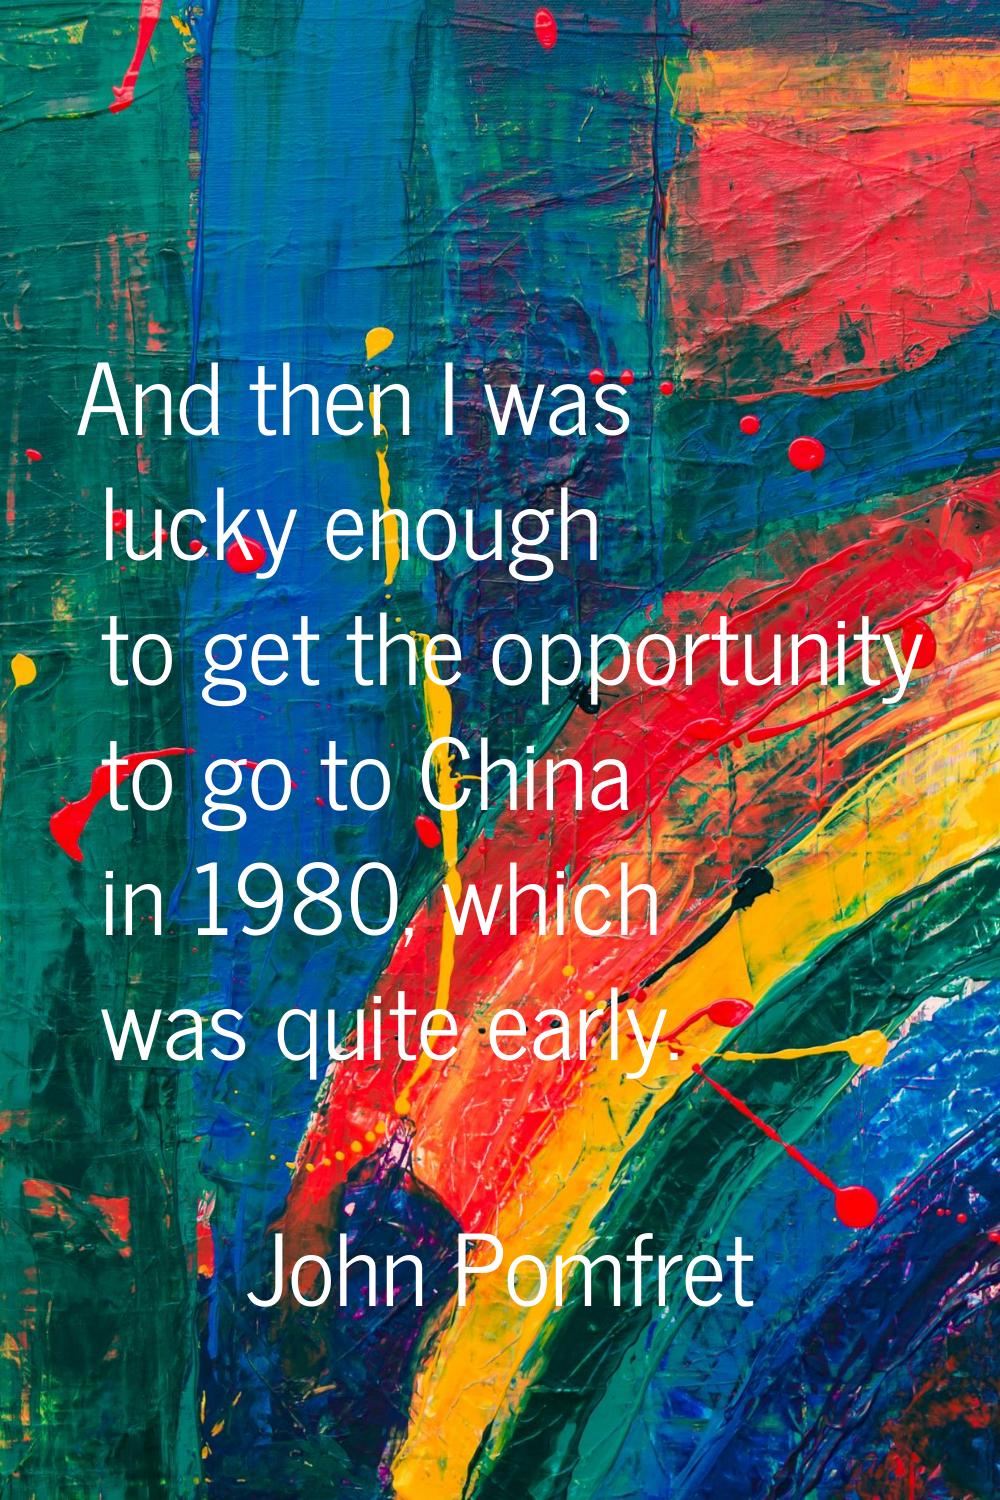 And then I was lucky enough to get the opportunity to go to China in 1980, which was quite early.